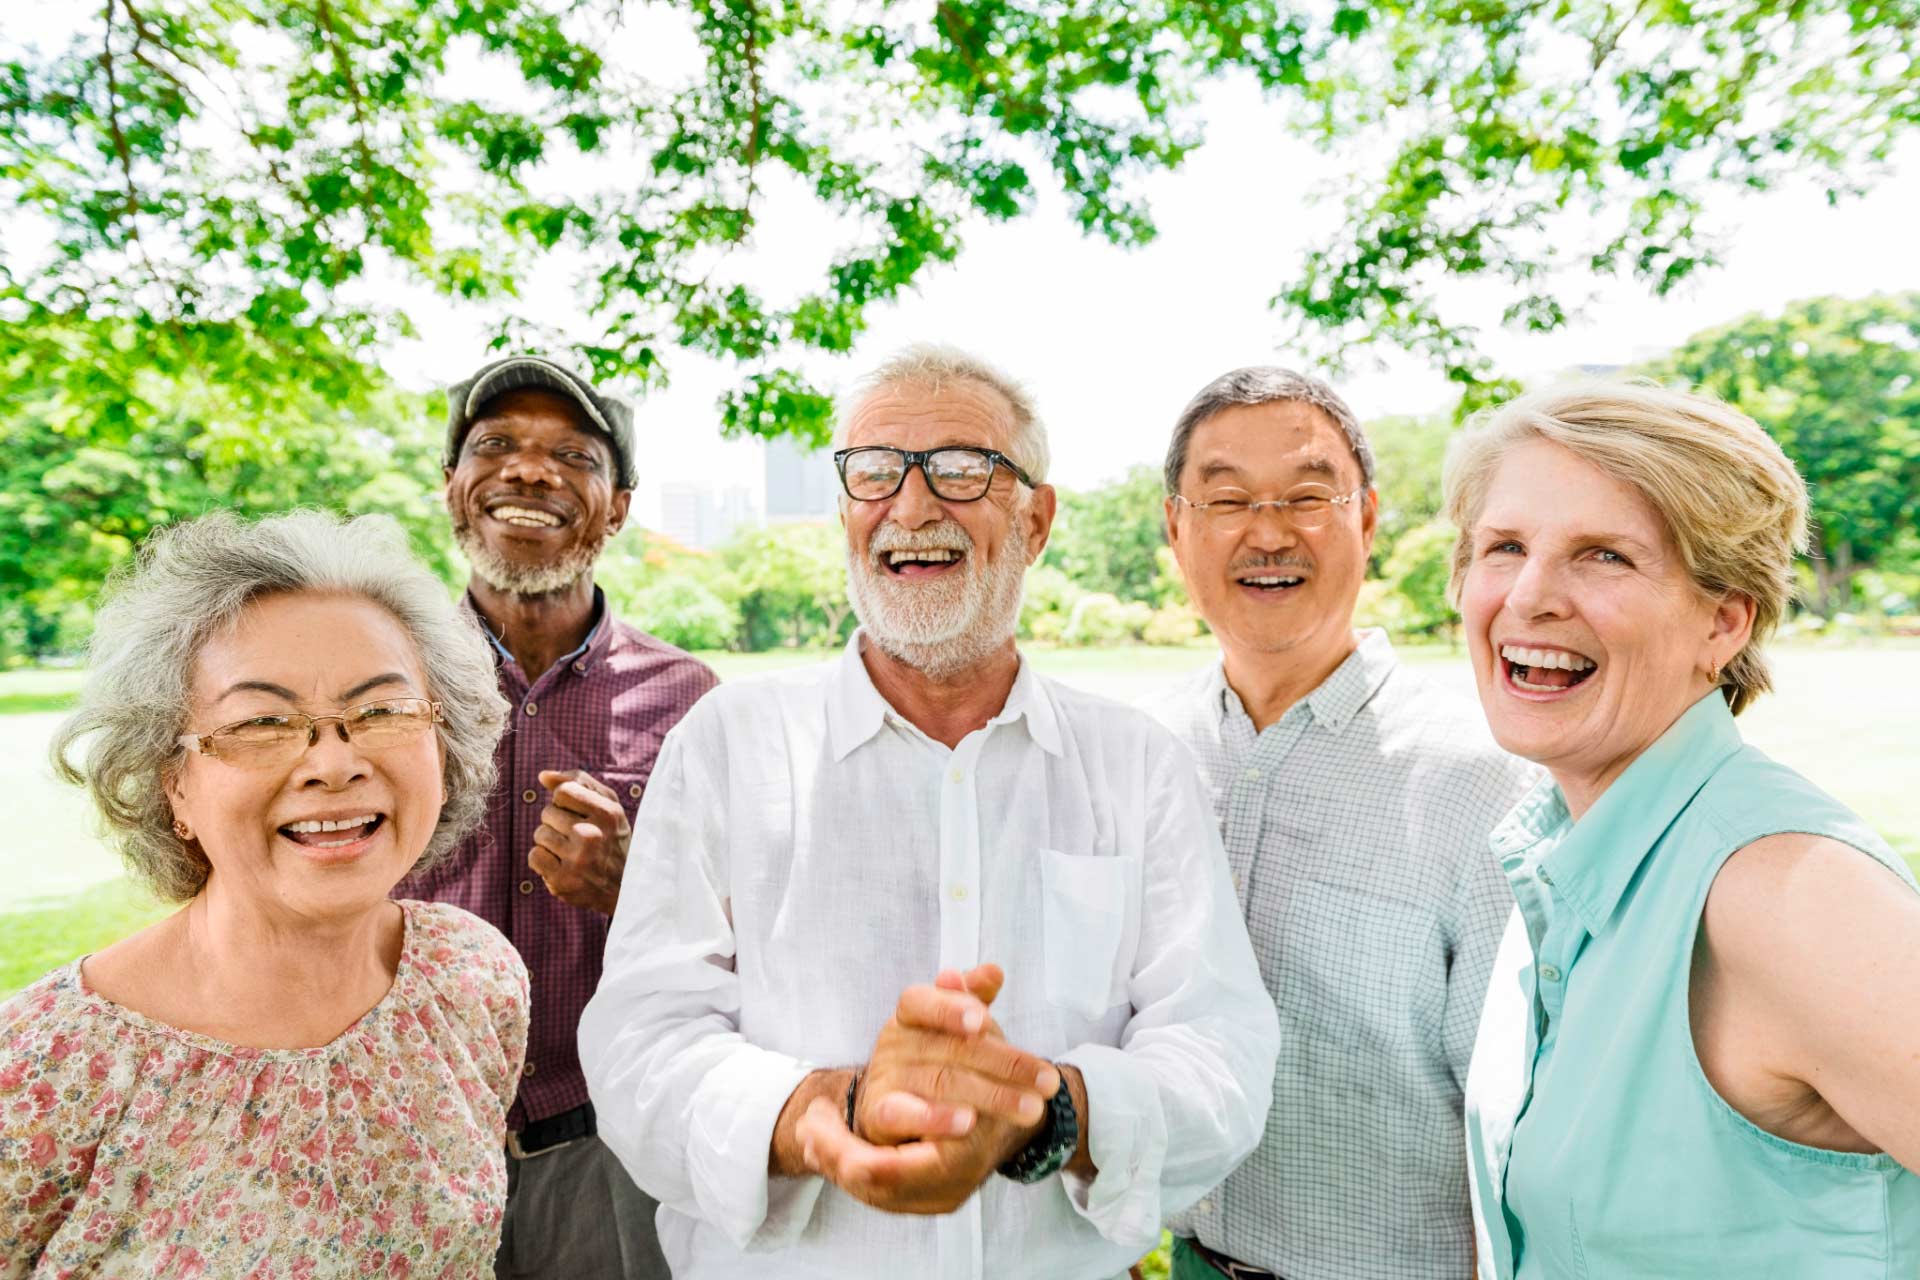 Five diverse older adults at a park on sunny day, smiling and socializing.